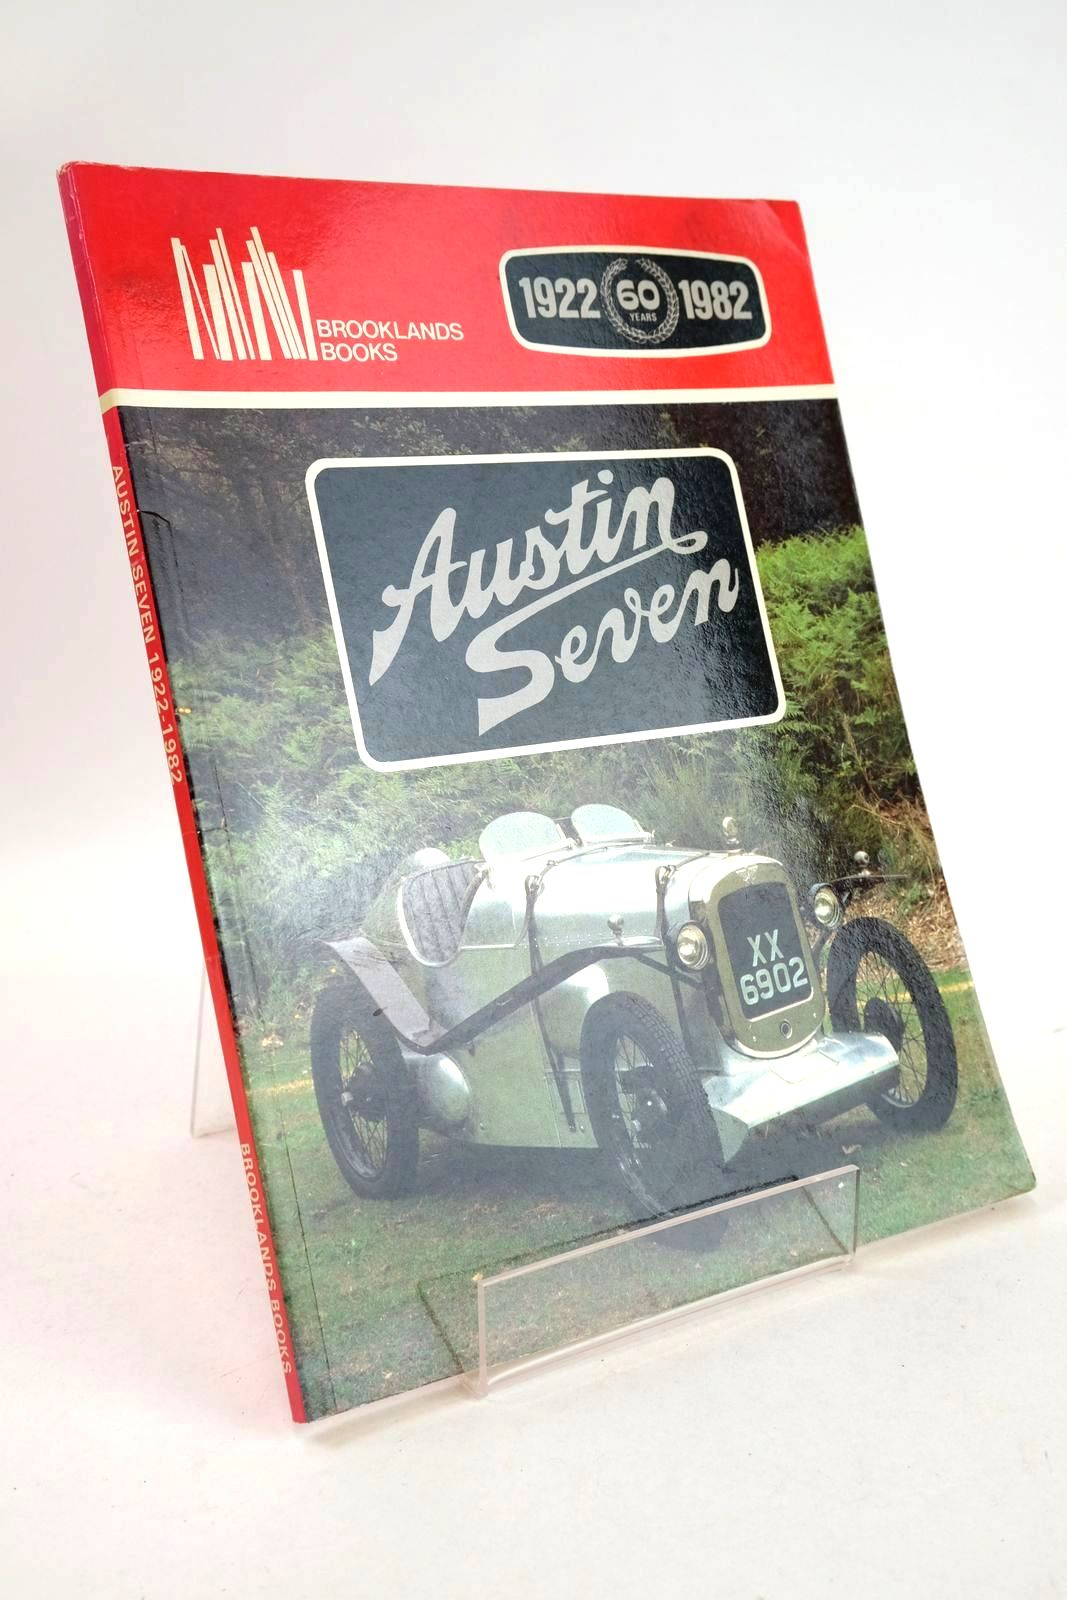 Photo of AUSTIN SEVEN 1922-1982 written by Clarke, R.M. published by Brooklands Books (STOCK CODE: 1326519)  for sale by Stella & Rose's Books